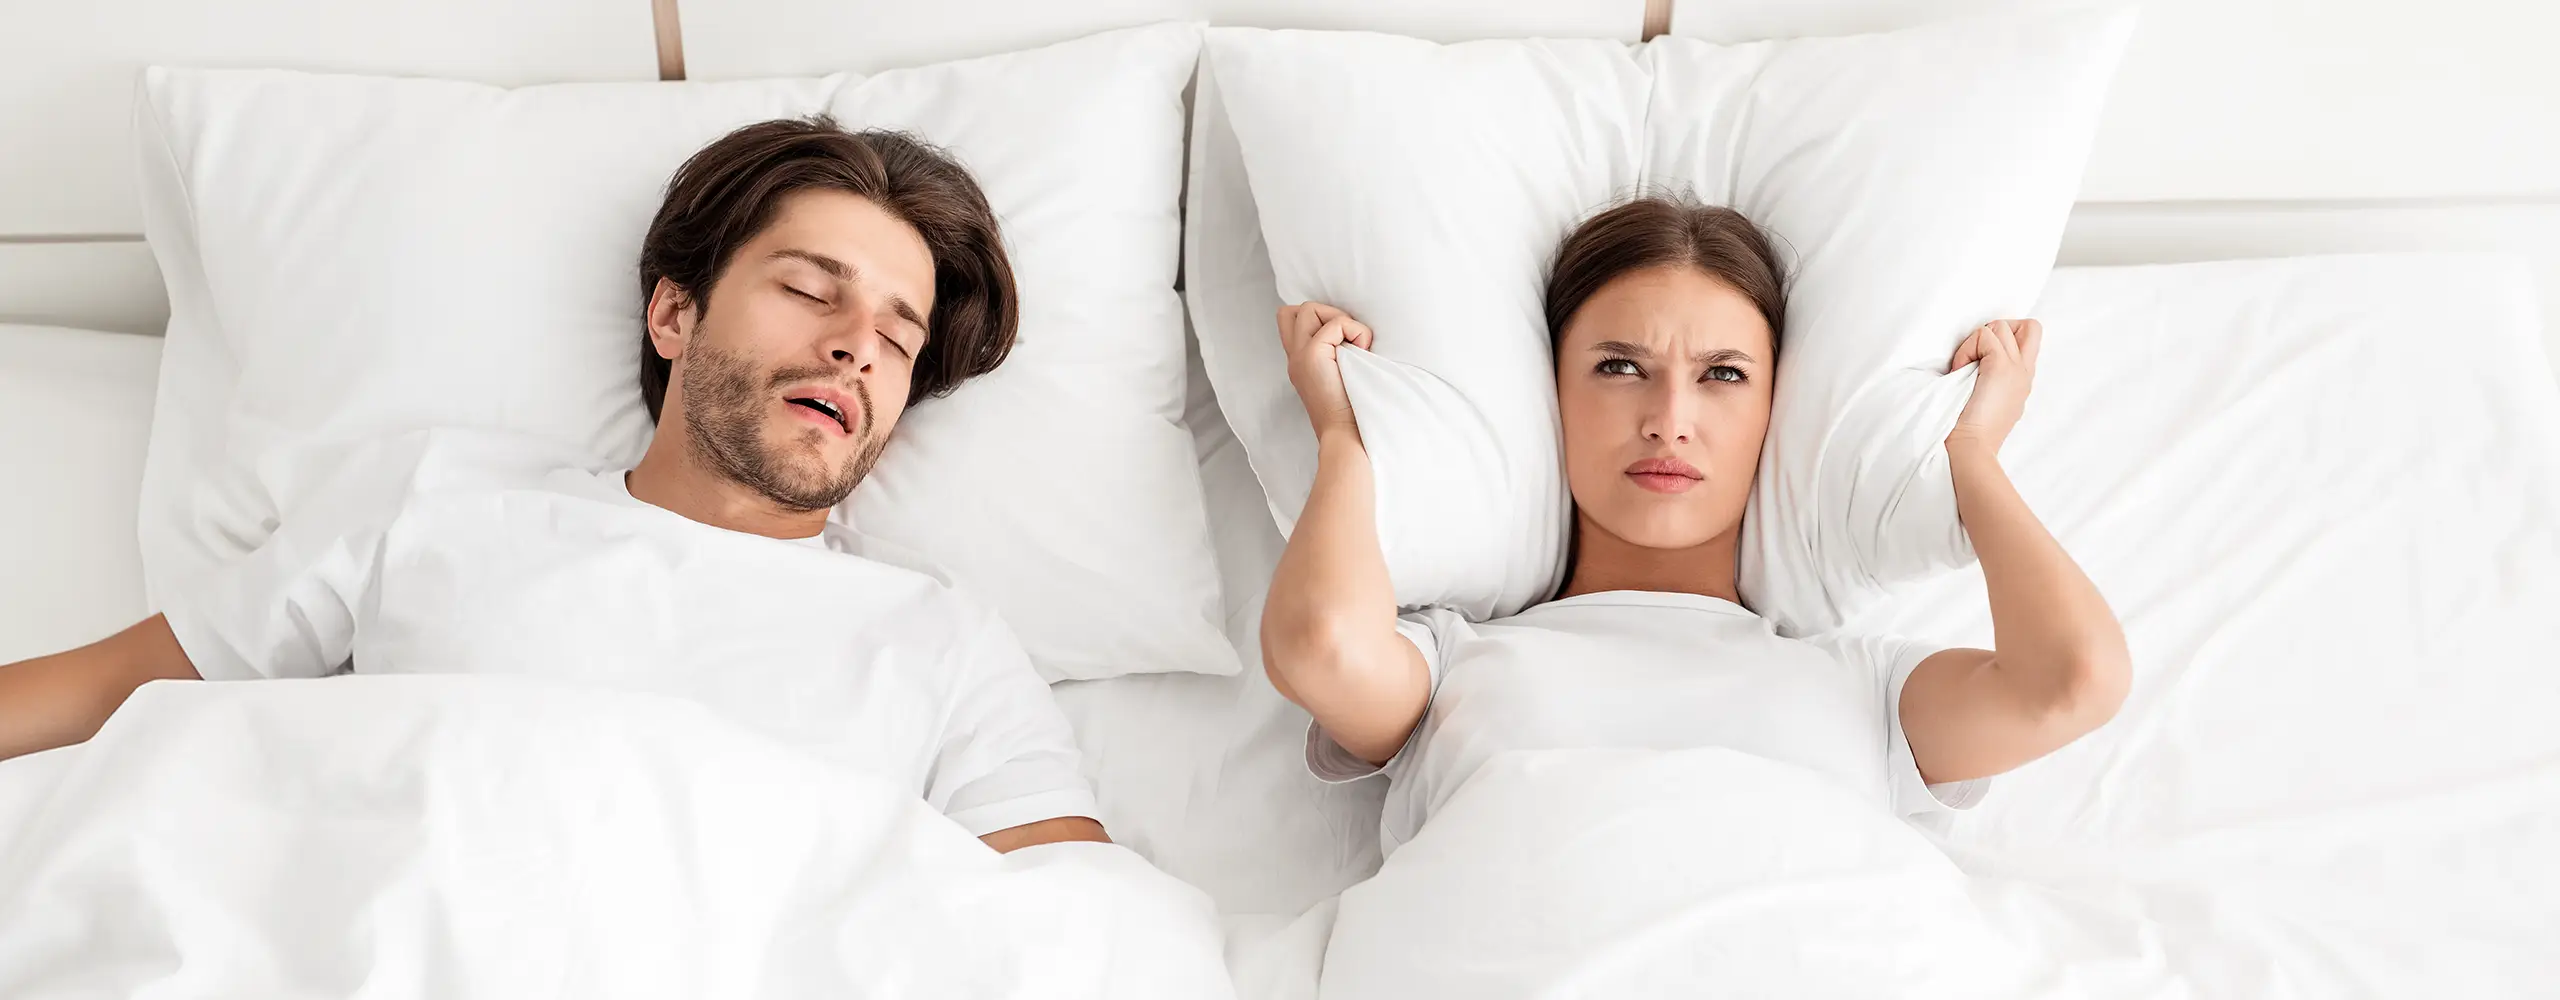 Snoring can be challenging for relationships | Clinic Profilance Zurich